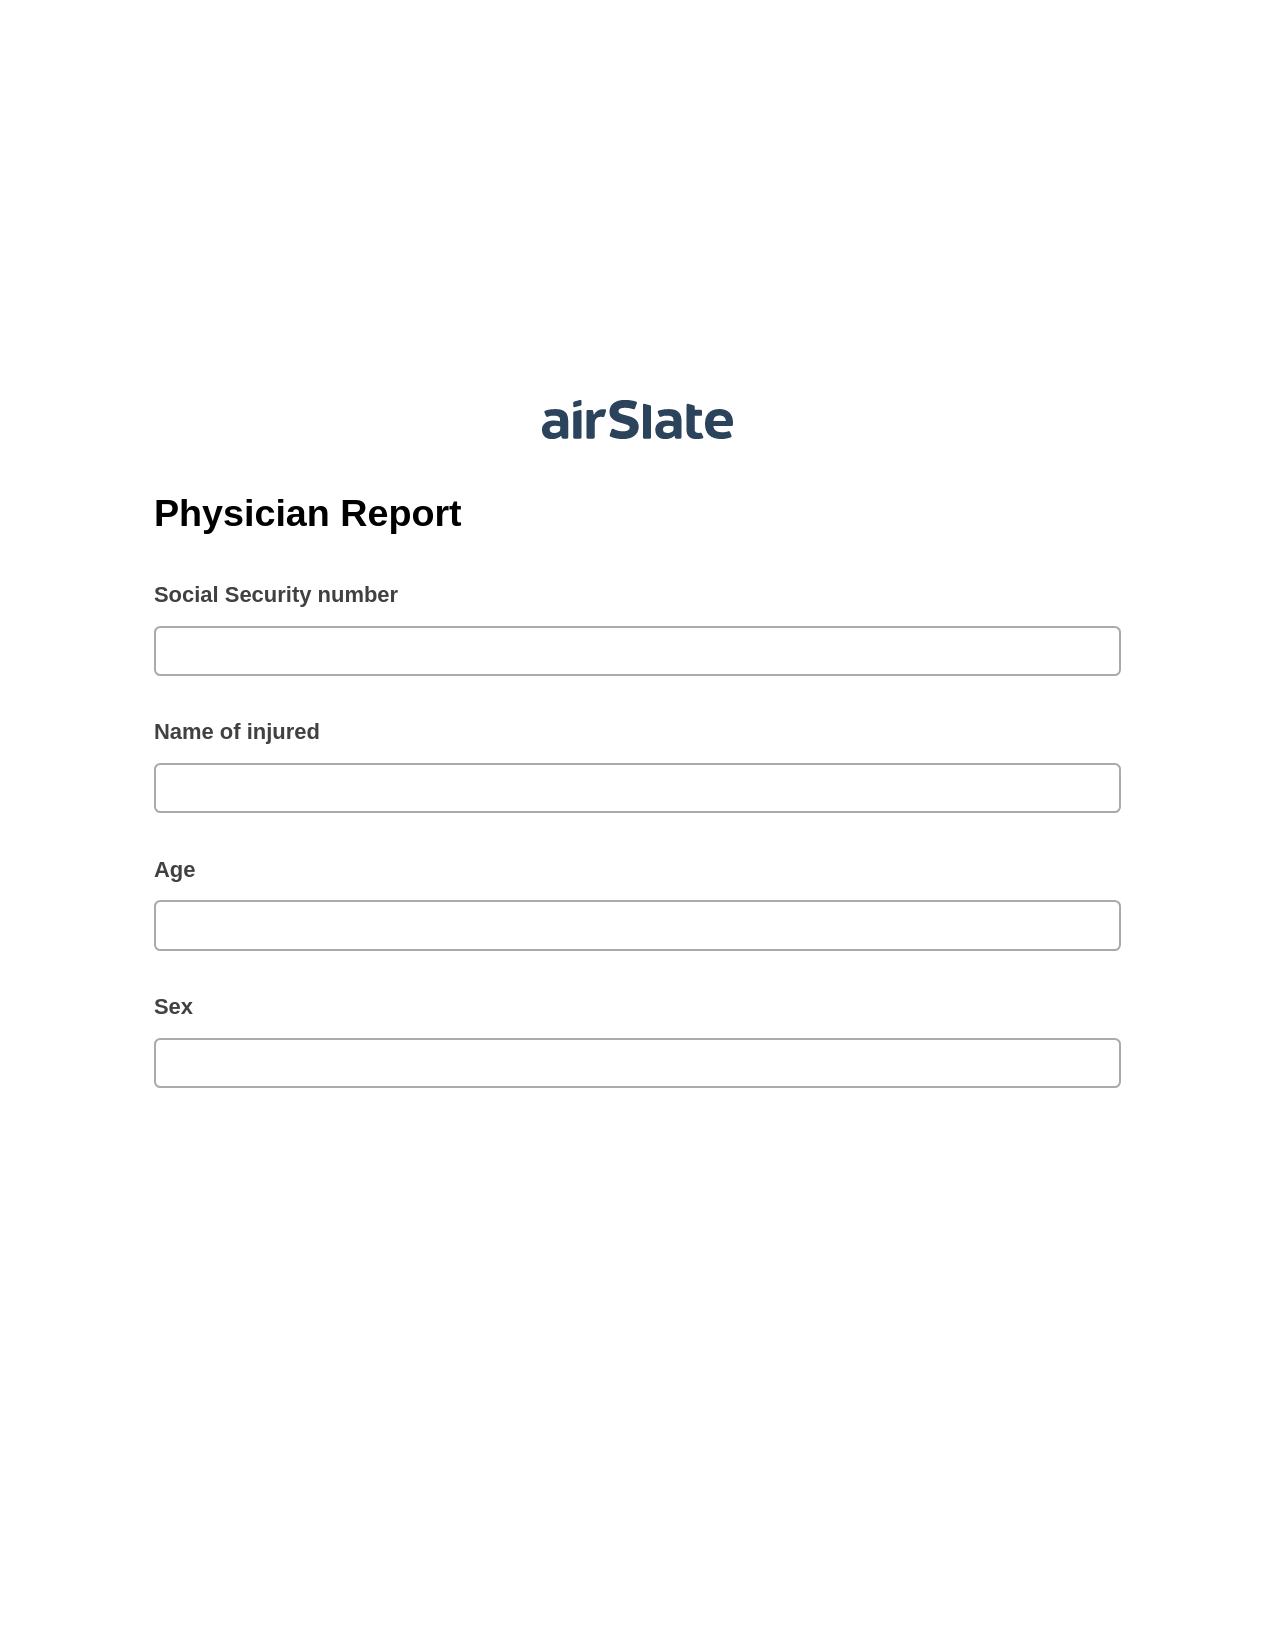 Physician Report Prefill from NetSuite records, Send a Slate to MS Dynamics 365 Contact Bot, Archive to SharePoint Folder Bot